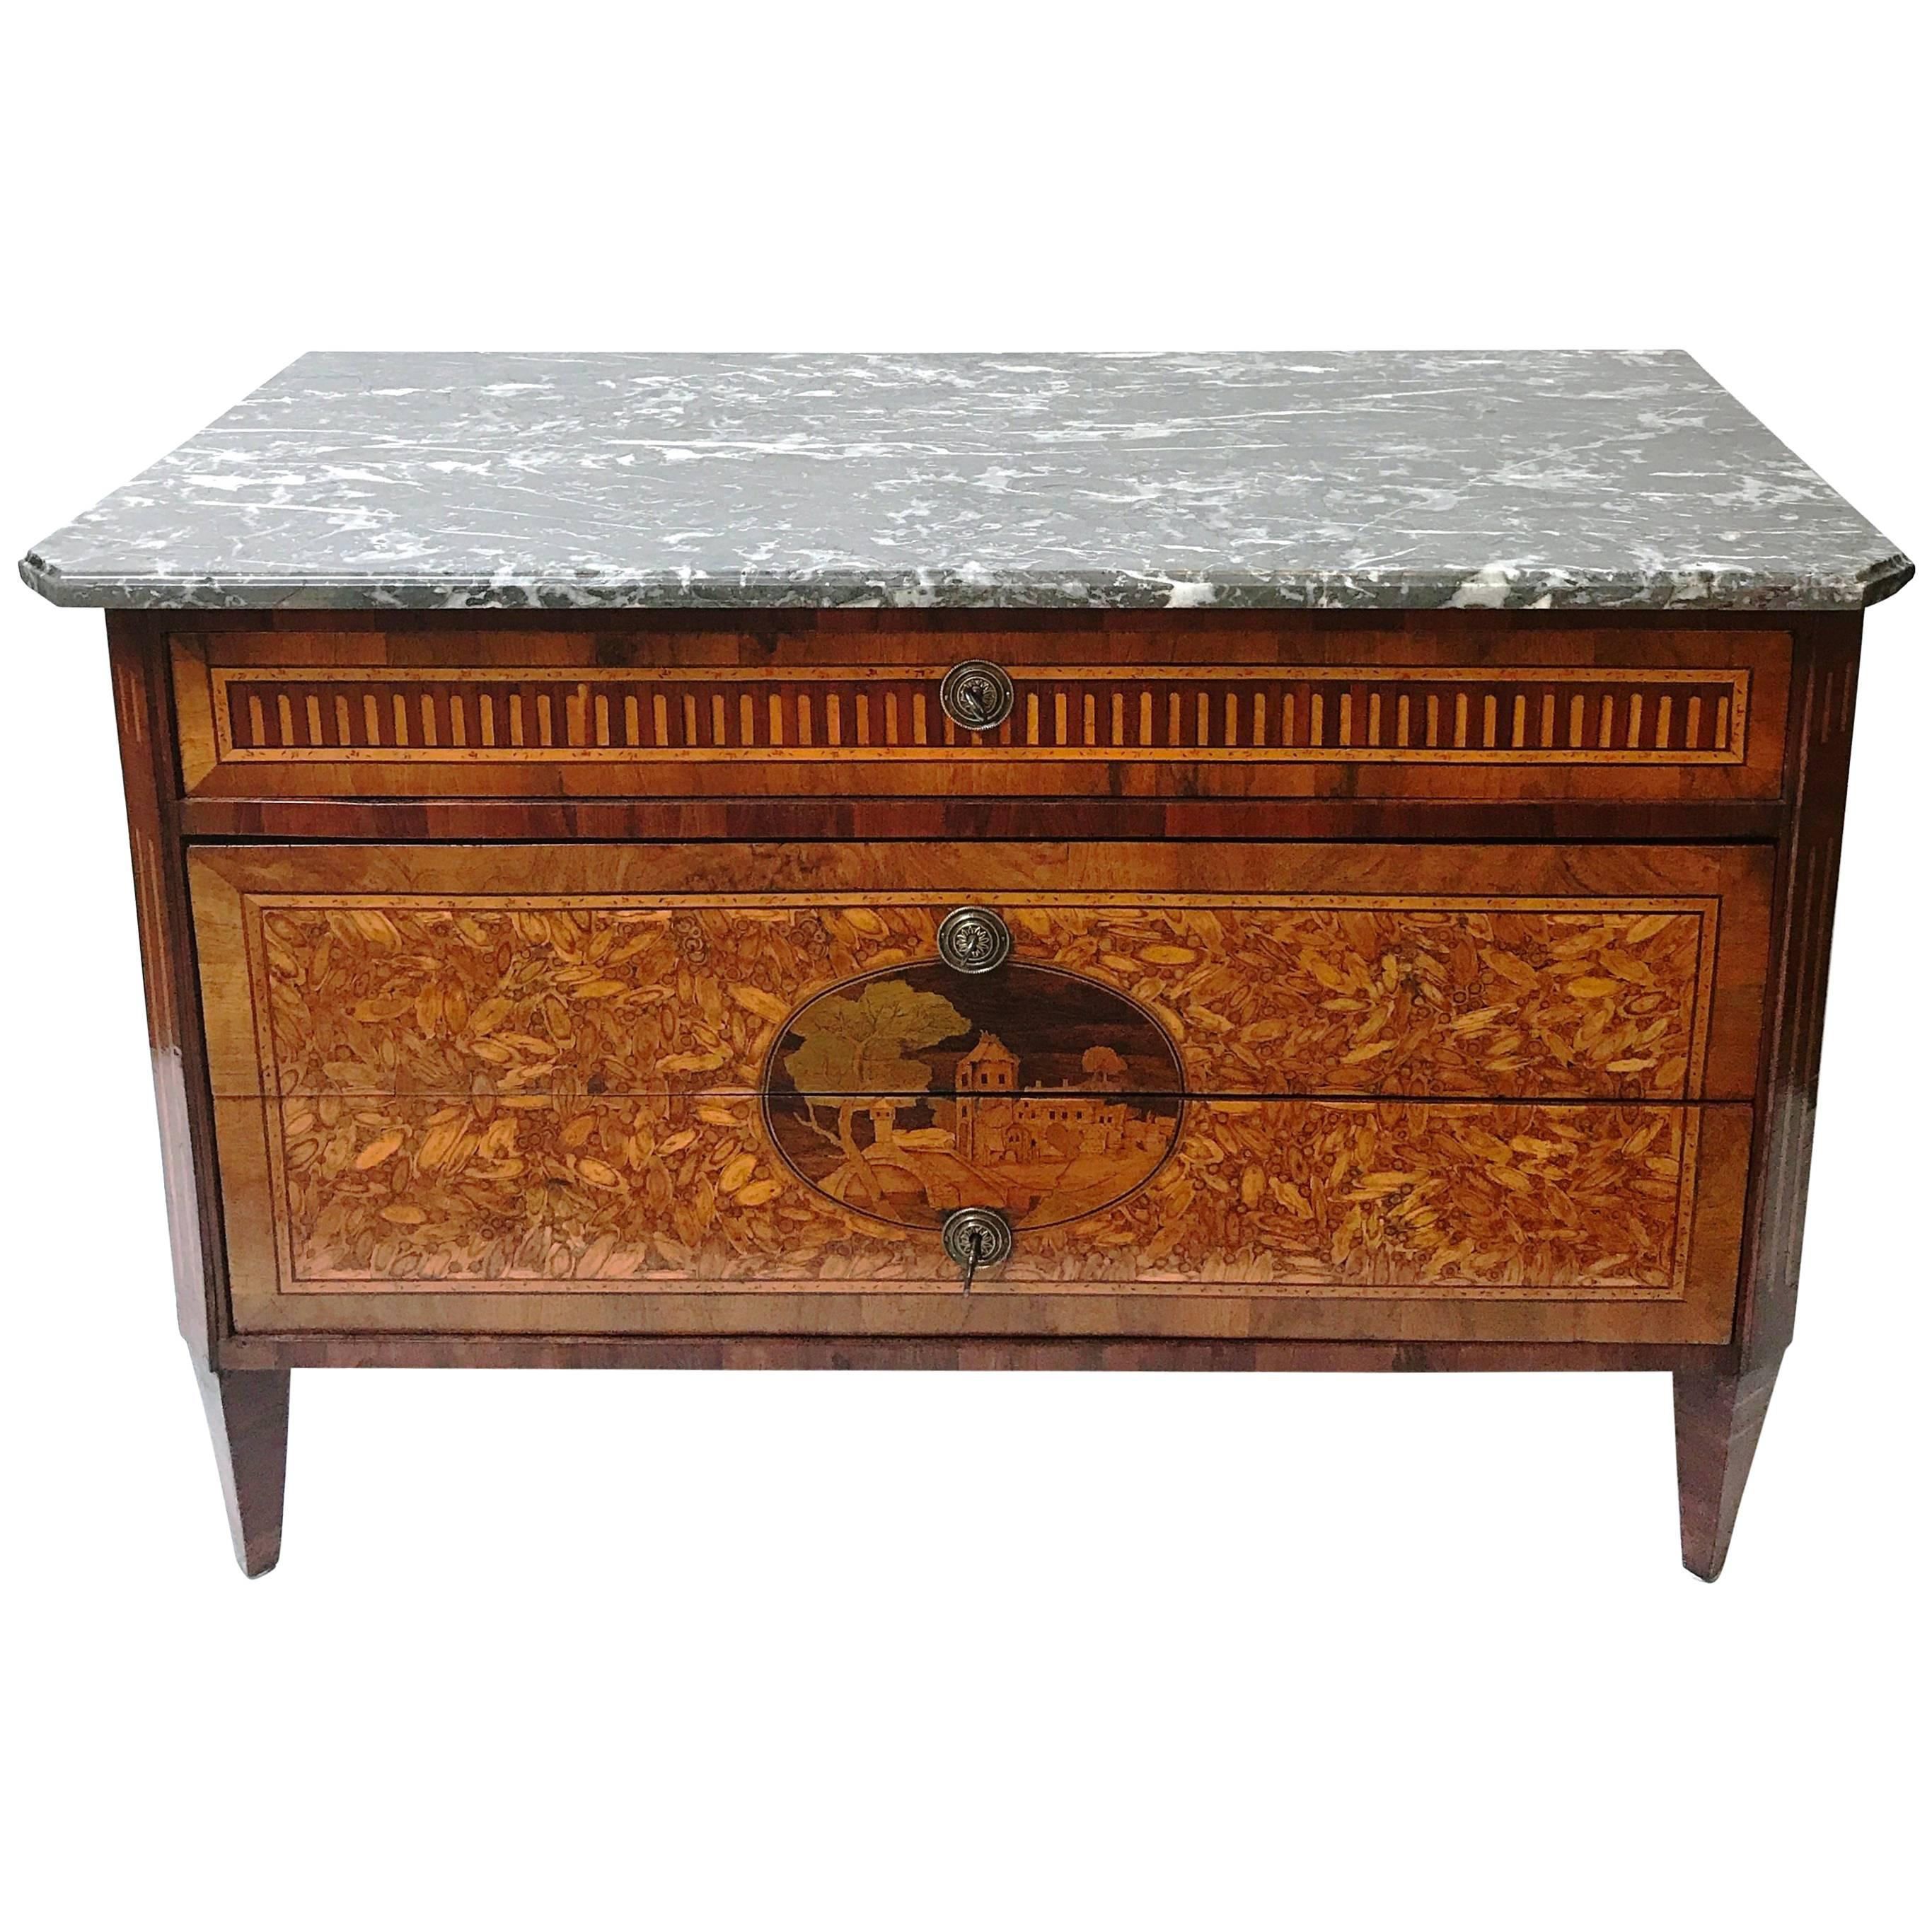 18th Century Italian Oyster Veneered Commode in the Manner of Maggiolini For Sale